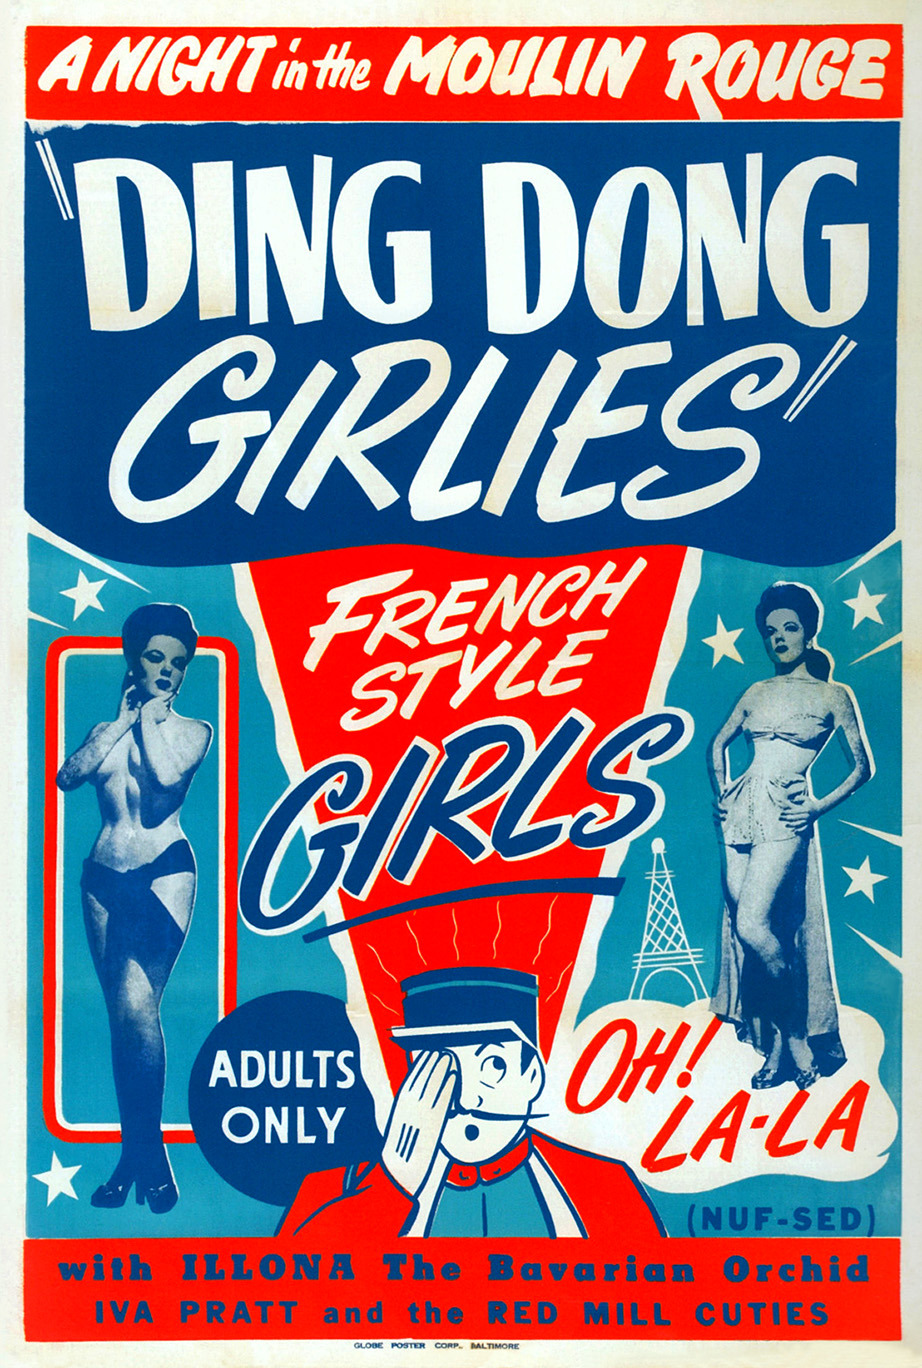 Vintage 50′s-era poster for the Burlesque film: “DING DONG GIRLIES”; directed